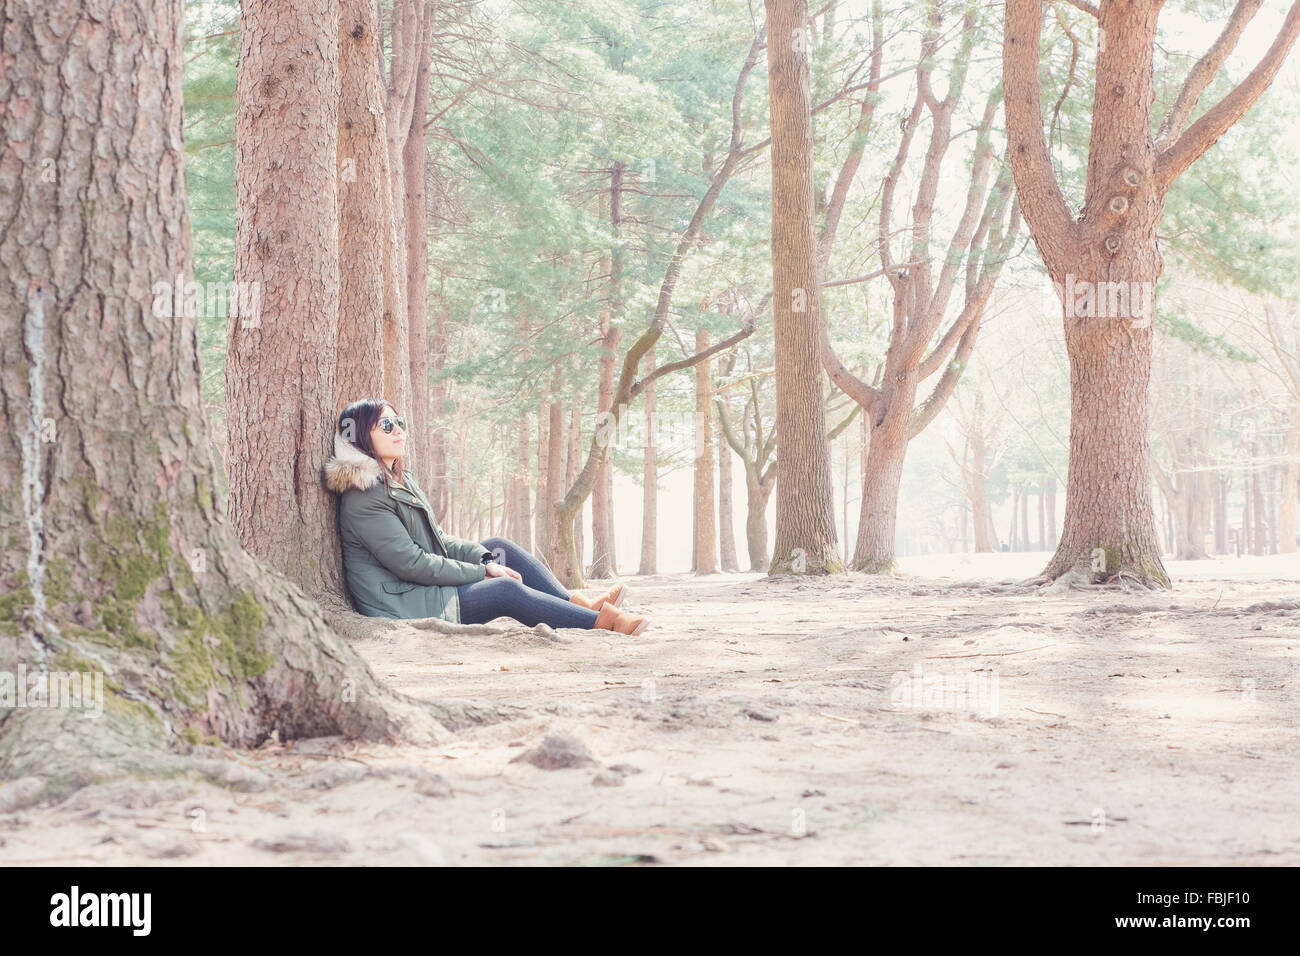 Asian woman sitting in the forest Stock Photo